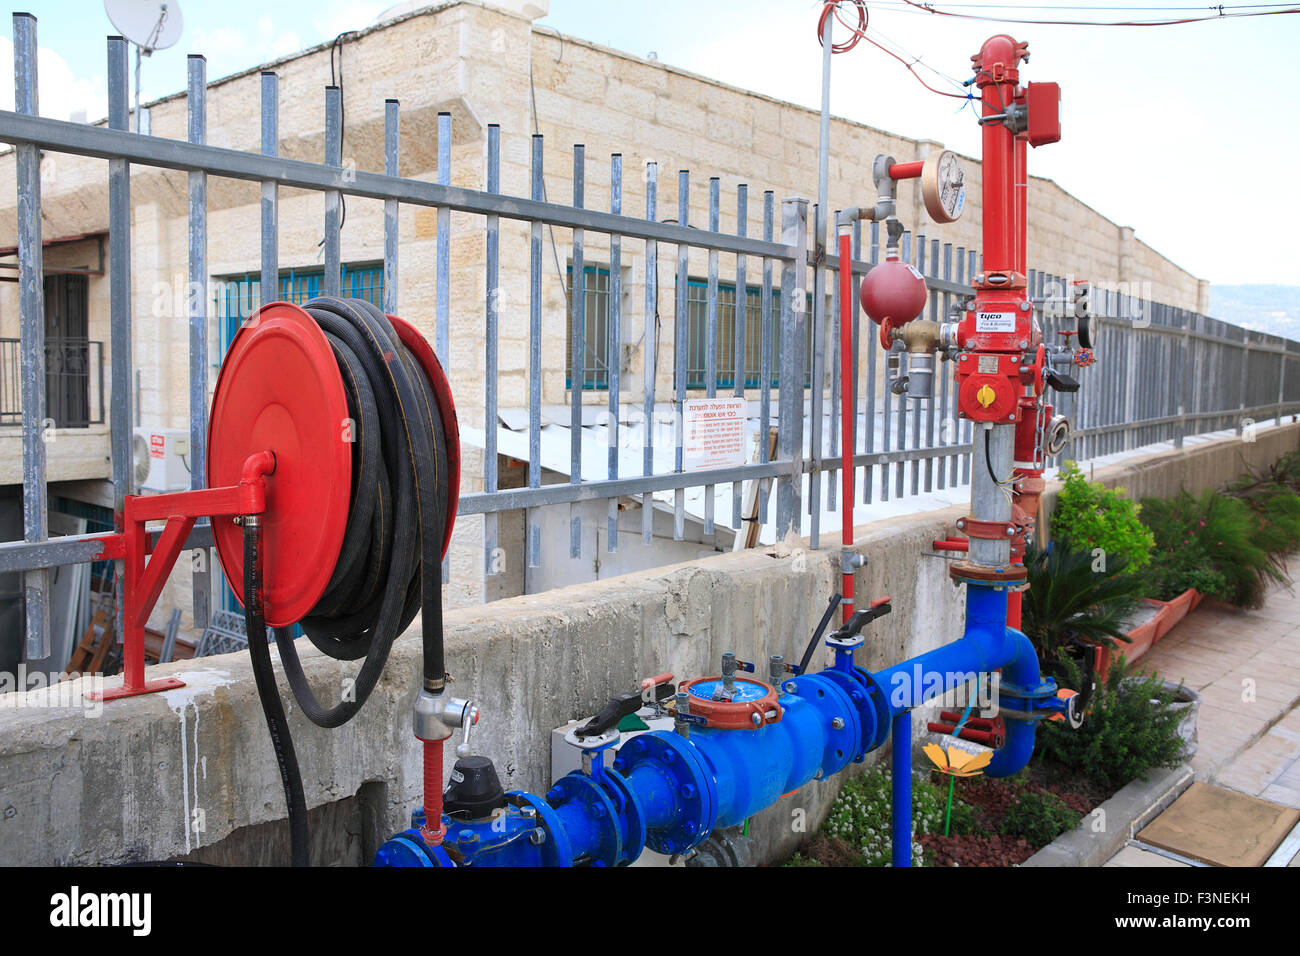 fire sprinkler system and hose reel at industrial building in Beit Shemesh, nearby Jerusalem, Israel Stock Photo